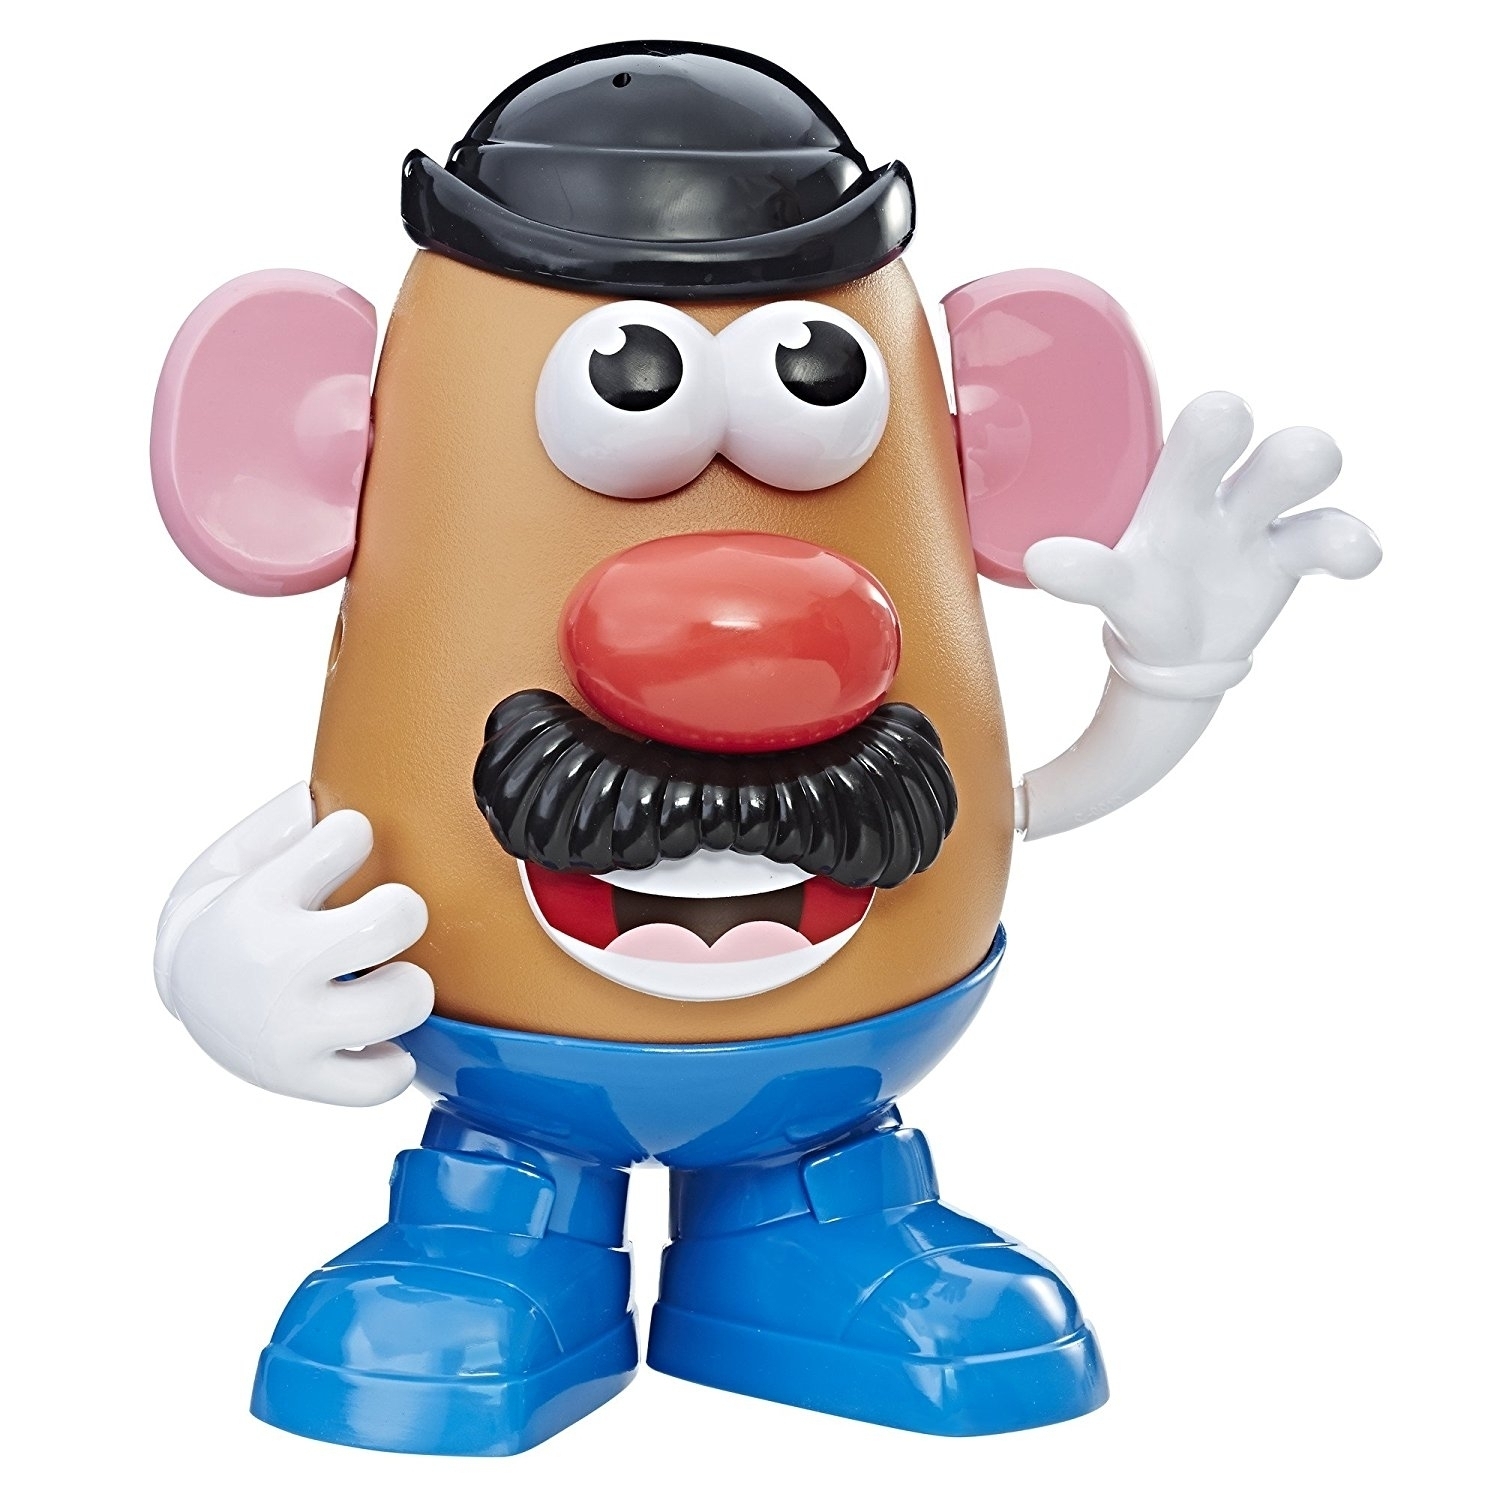 Mr Potato Head Spare Parts eyes nose mouth hats glasses arms.